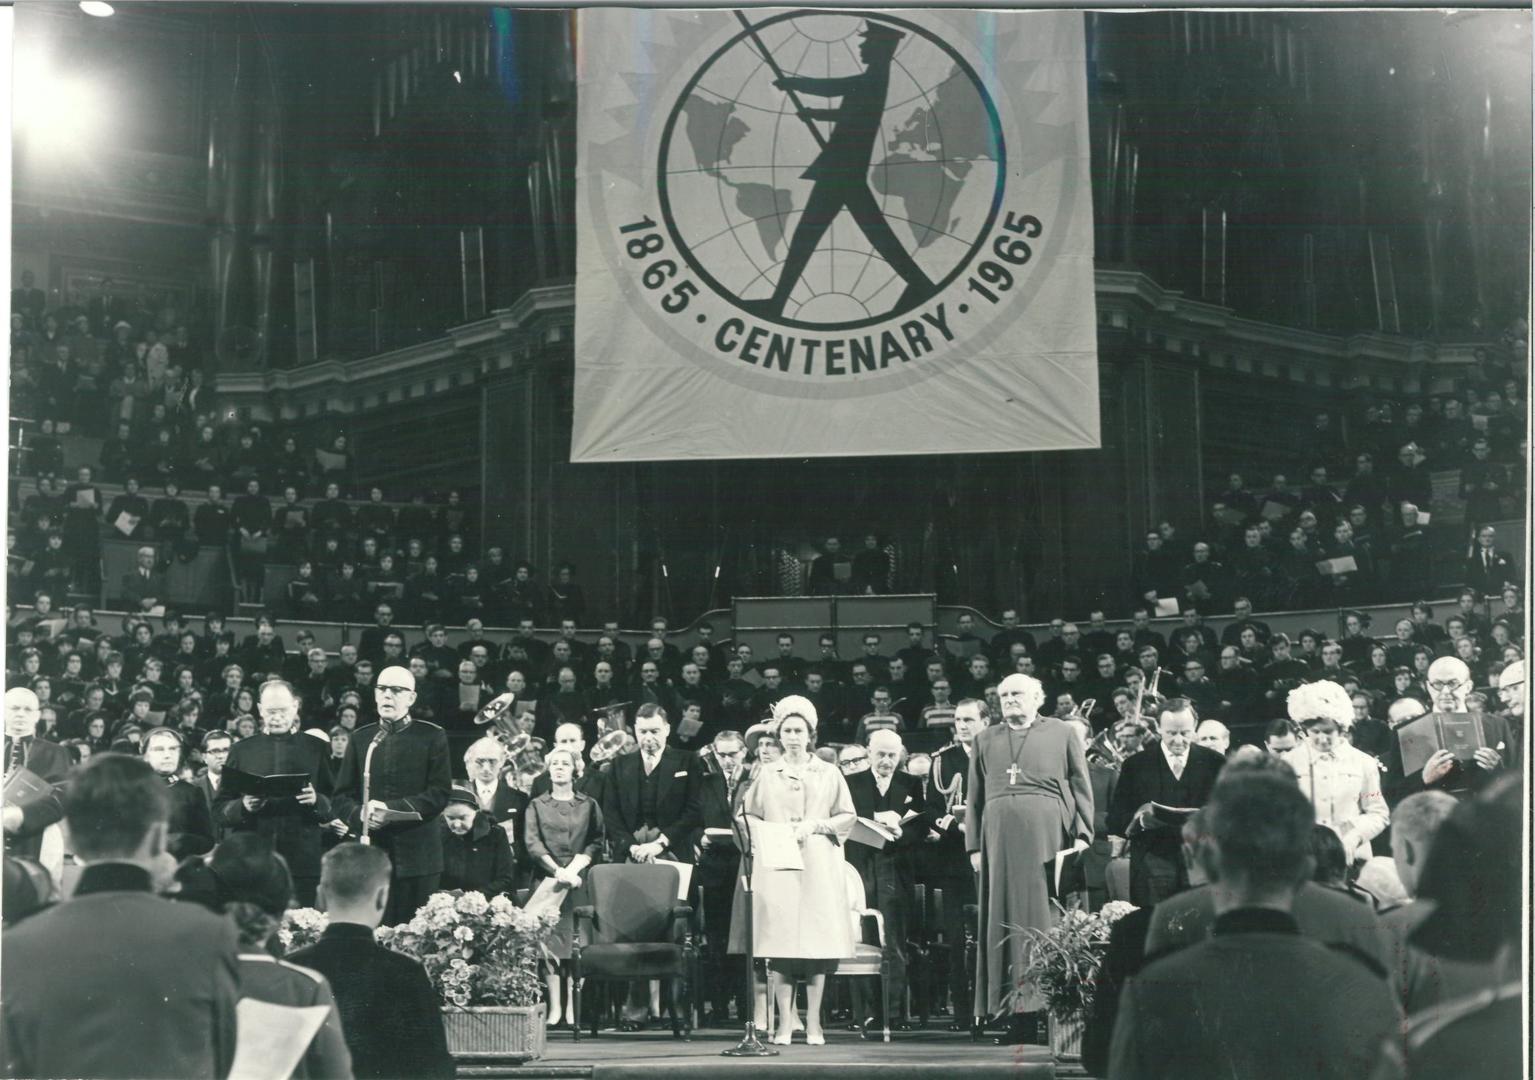 Queen Elizabeth II at The Salvation Army's Centenary, 1965